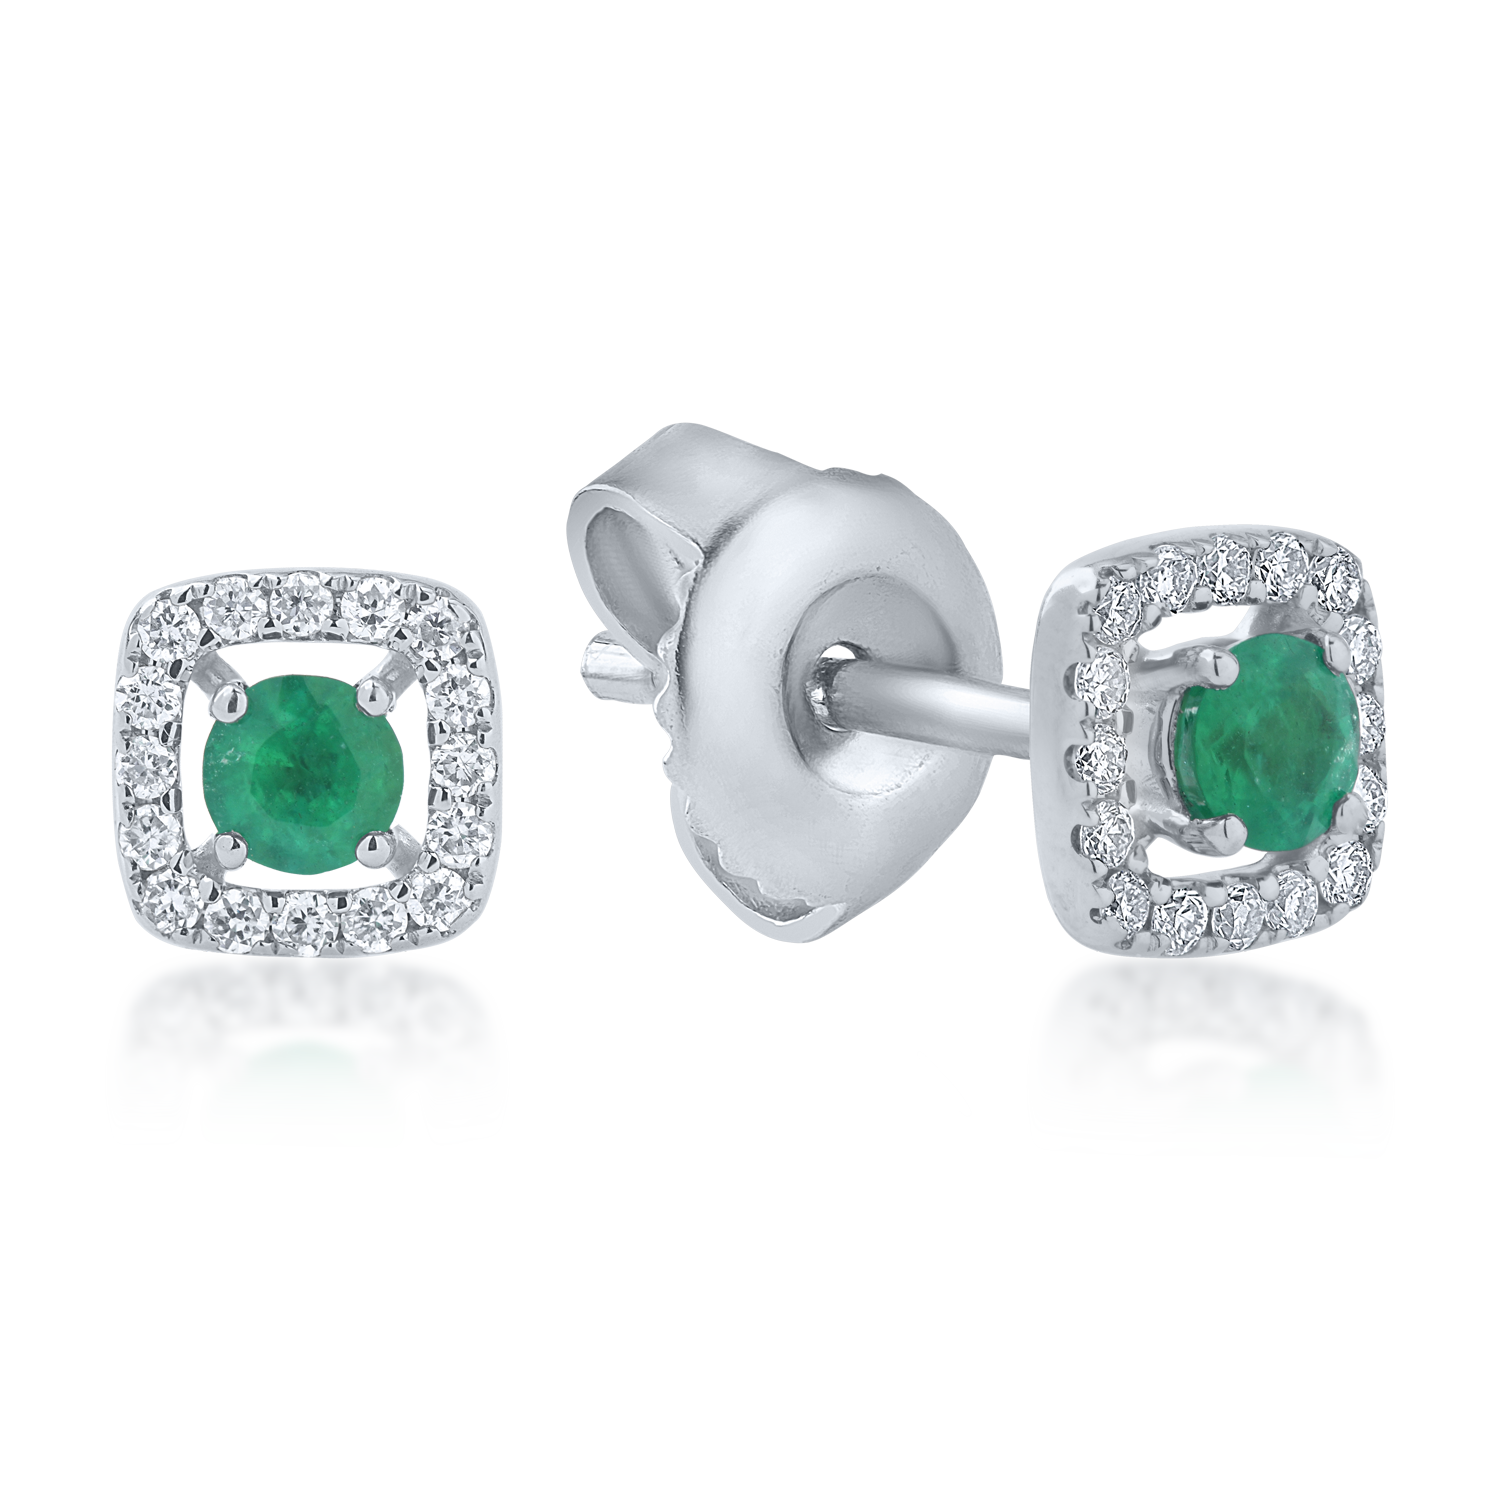 White gold earrings with 0.14ct emeralds and 0.08ct diamonds